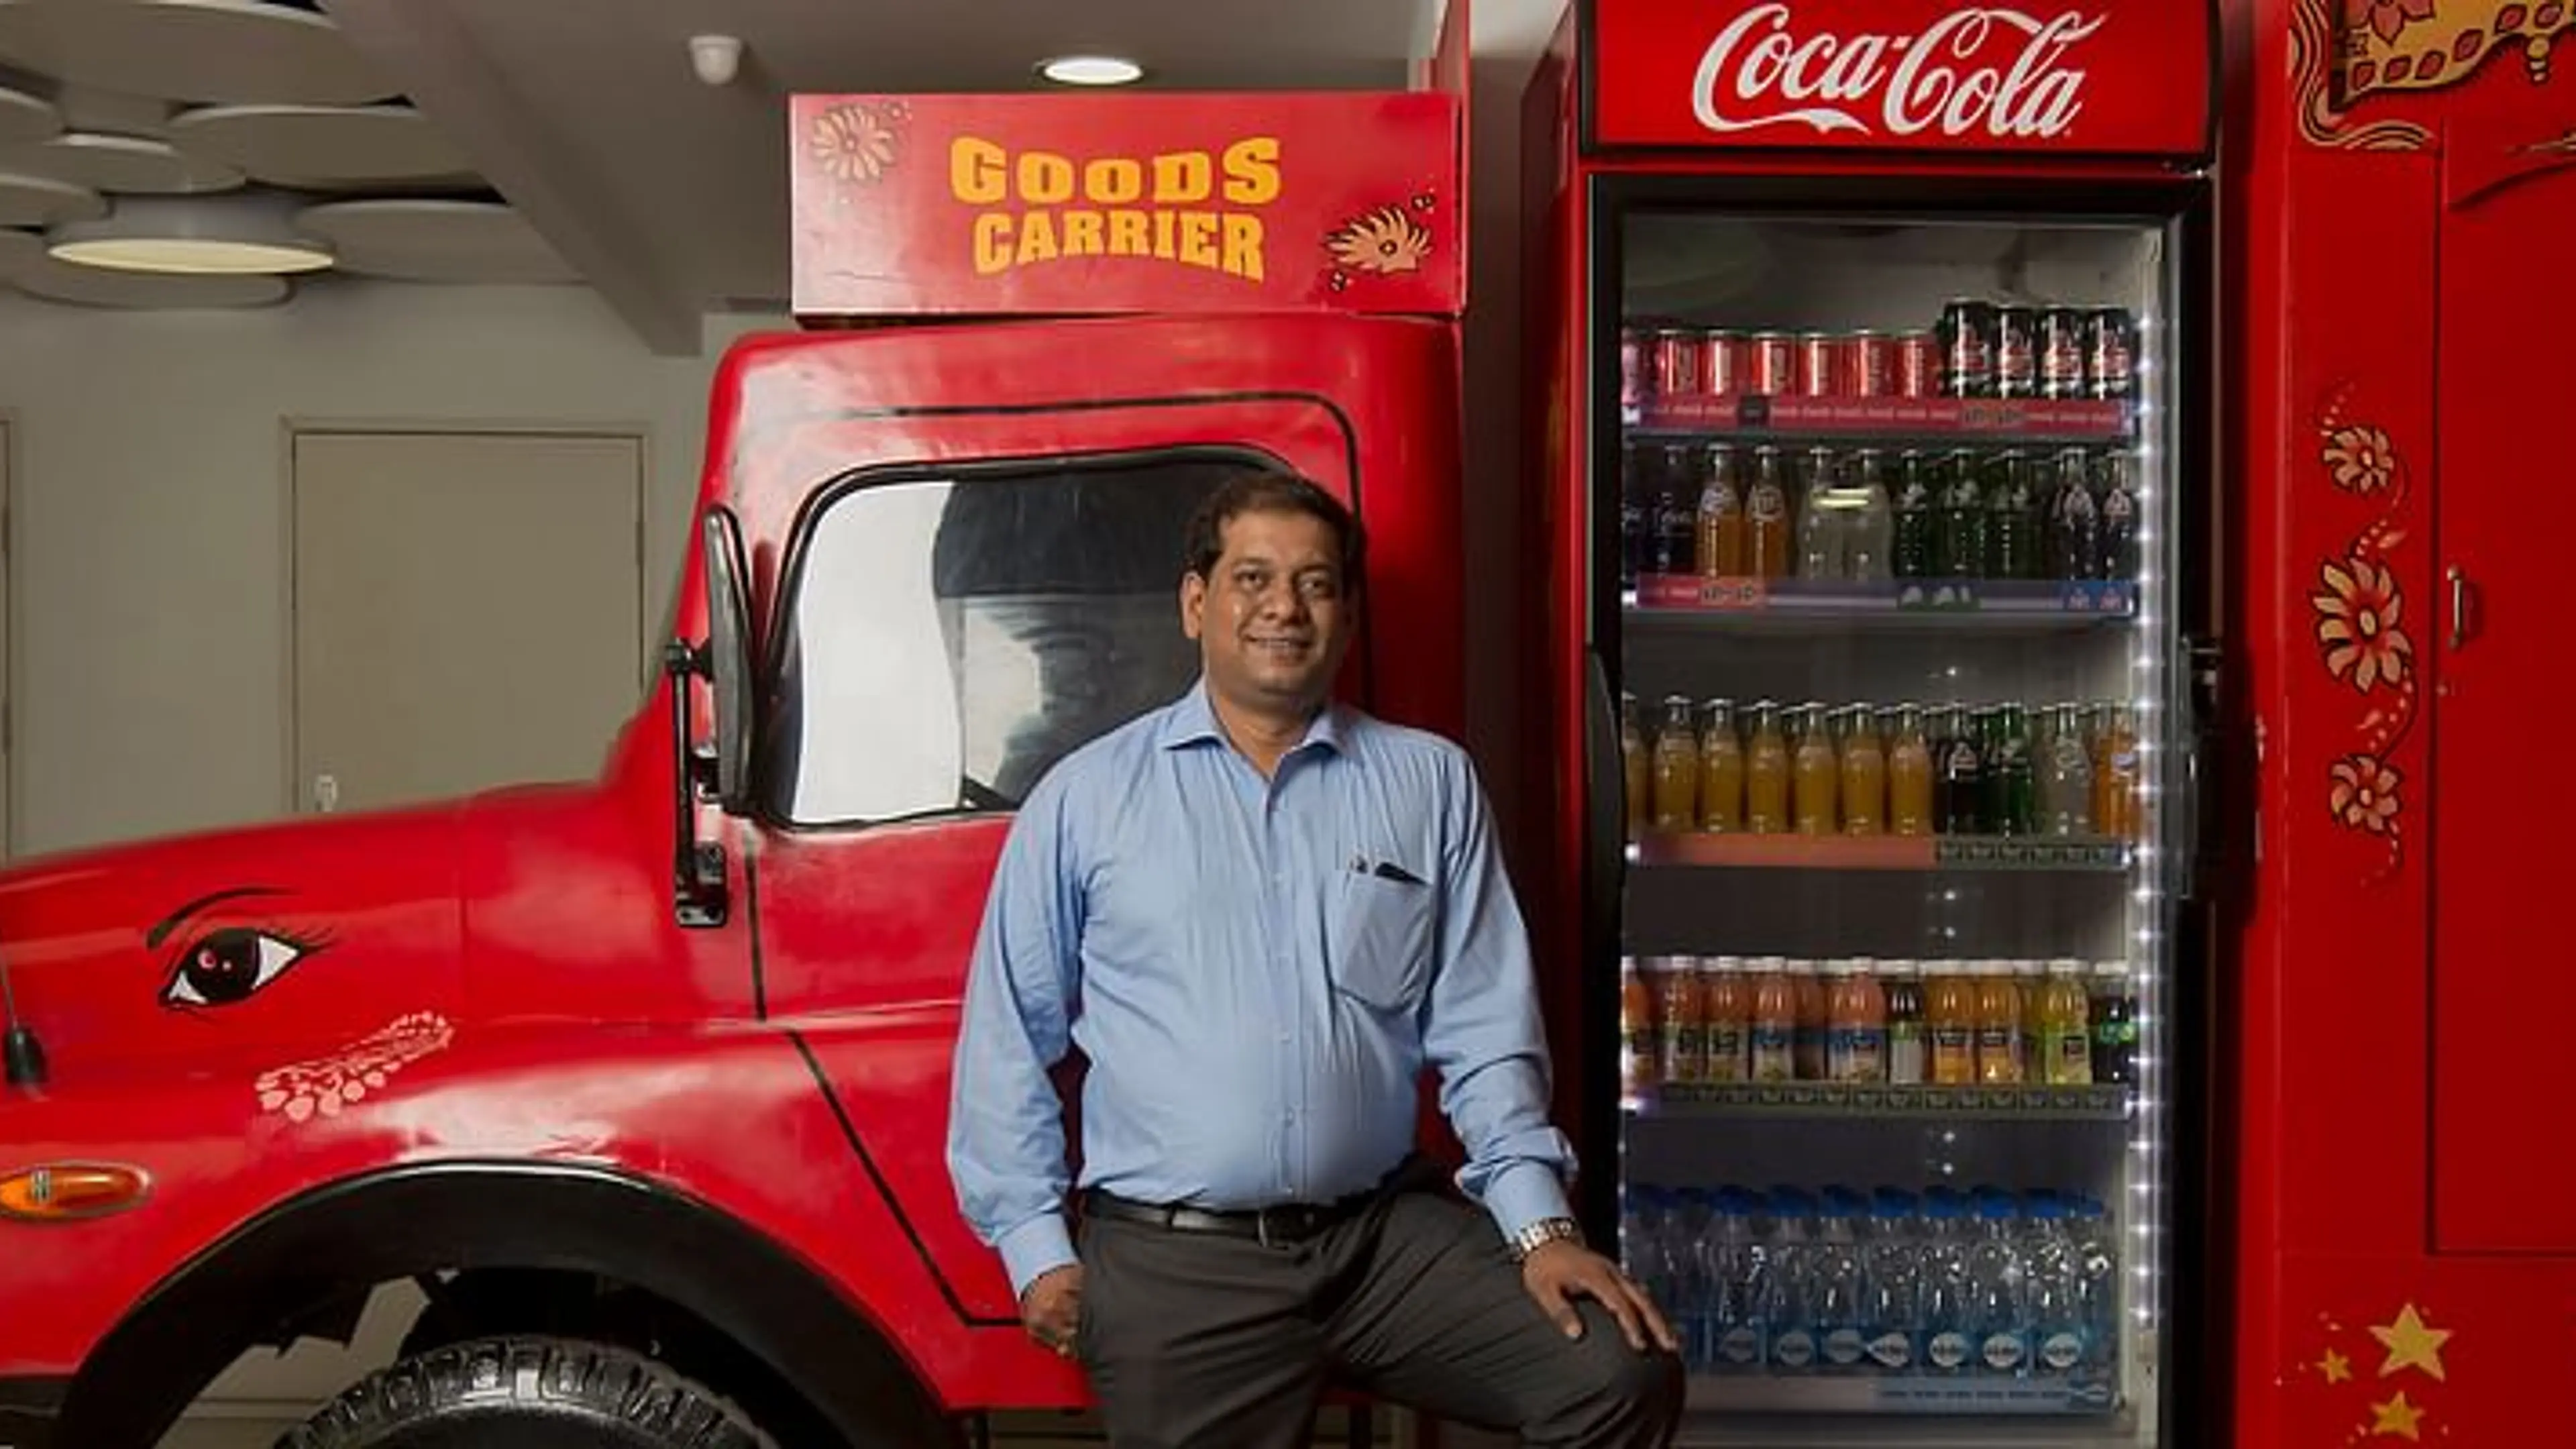 How this Coca Cola India manufacturer leveraged Swiggy, Dunzo to deal with COVID-19 impact